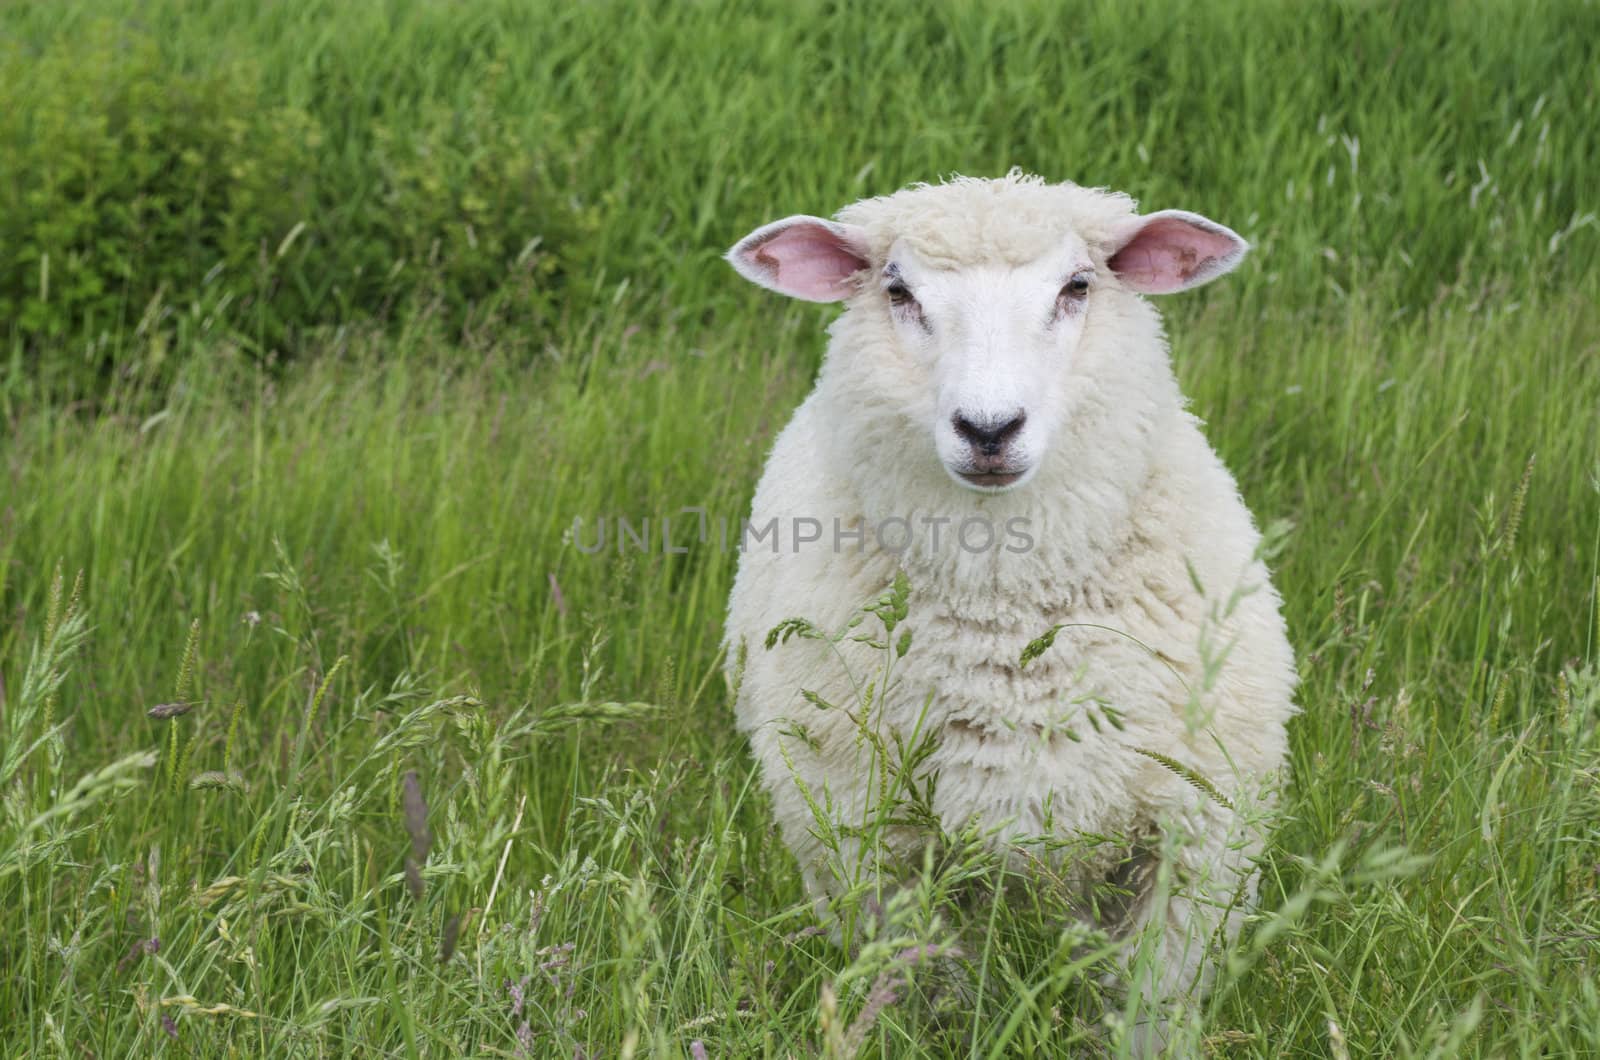 A cute sheep on a green meadow looking directly into the camera.